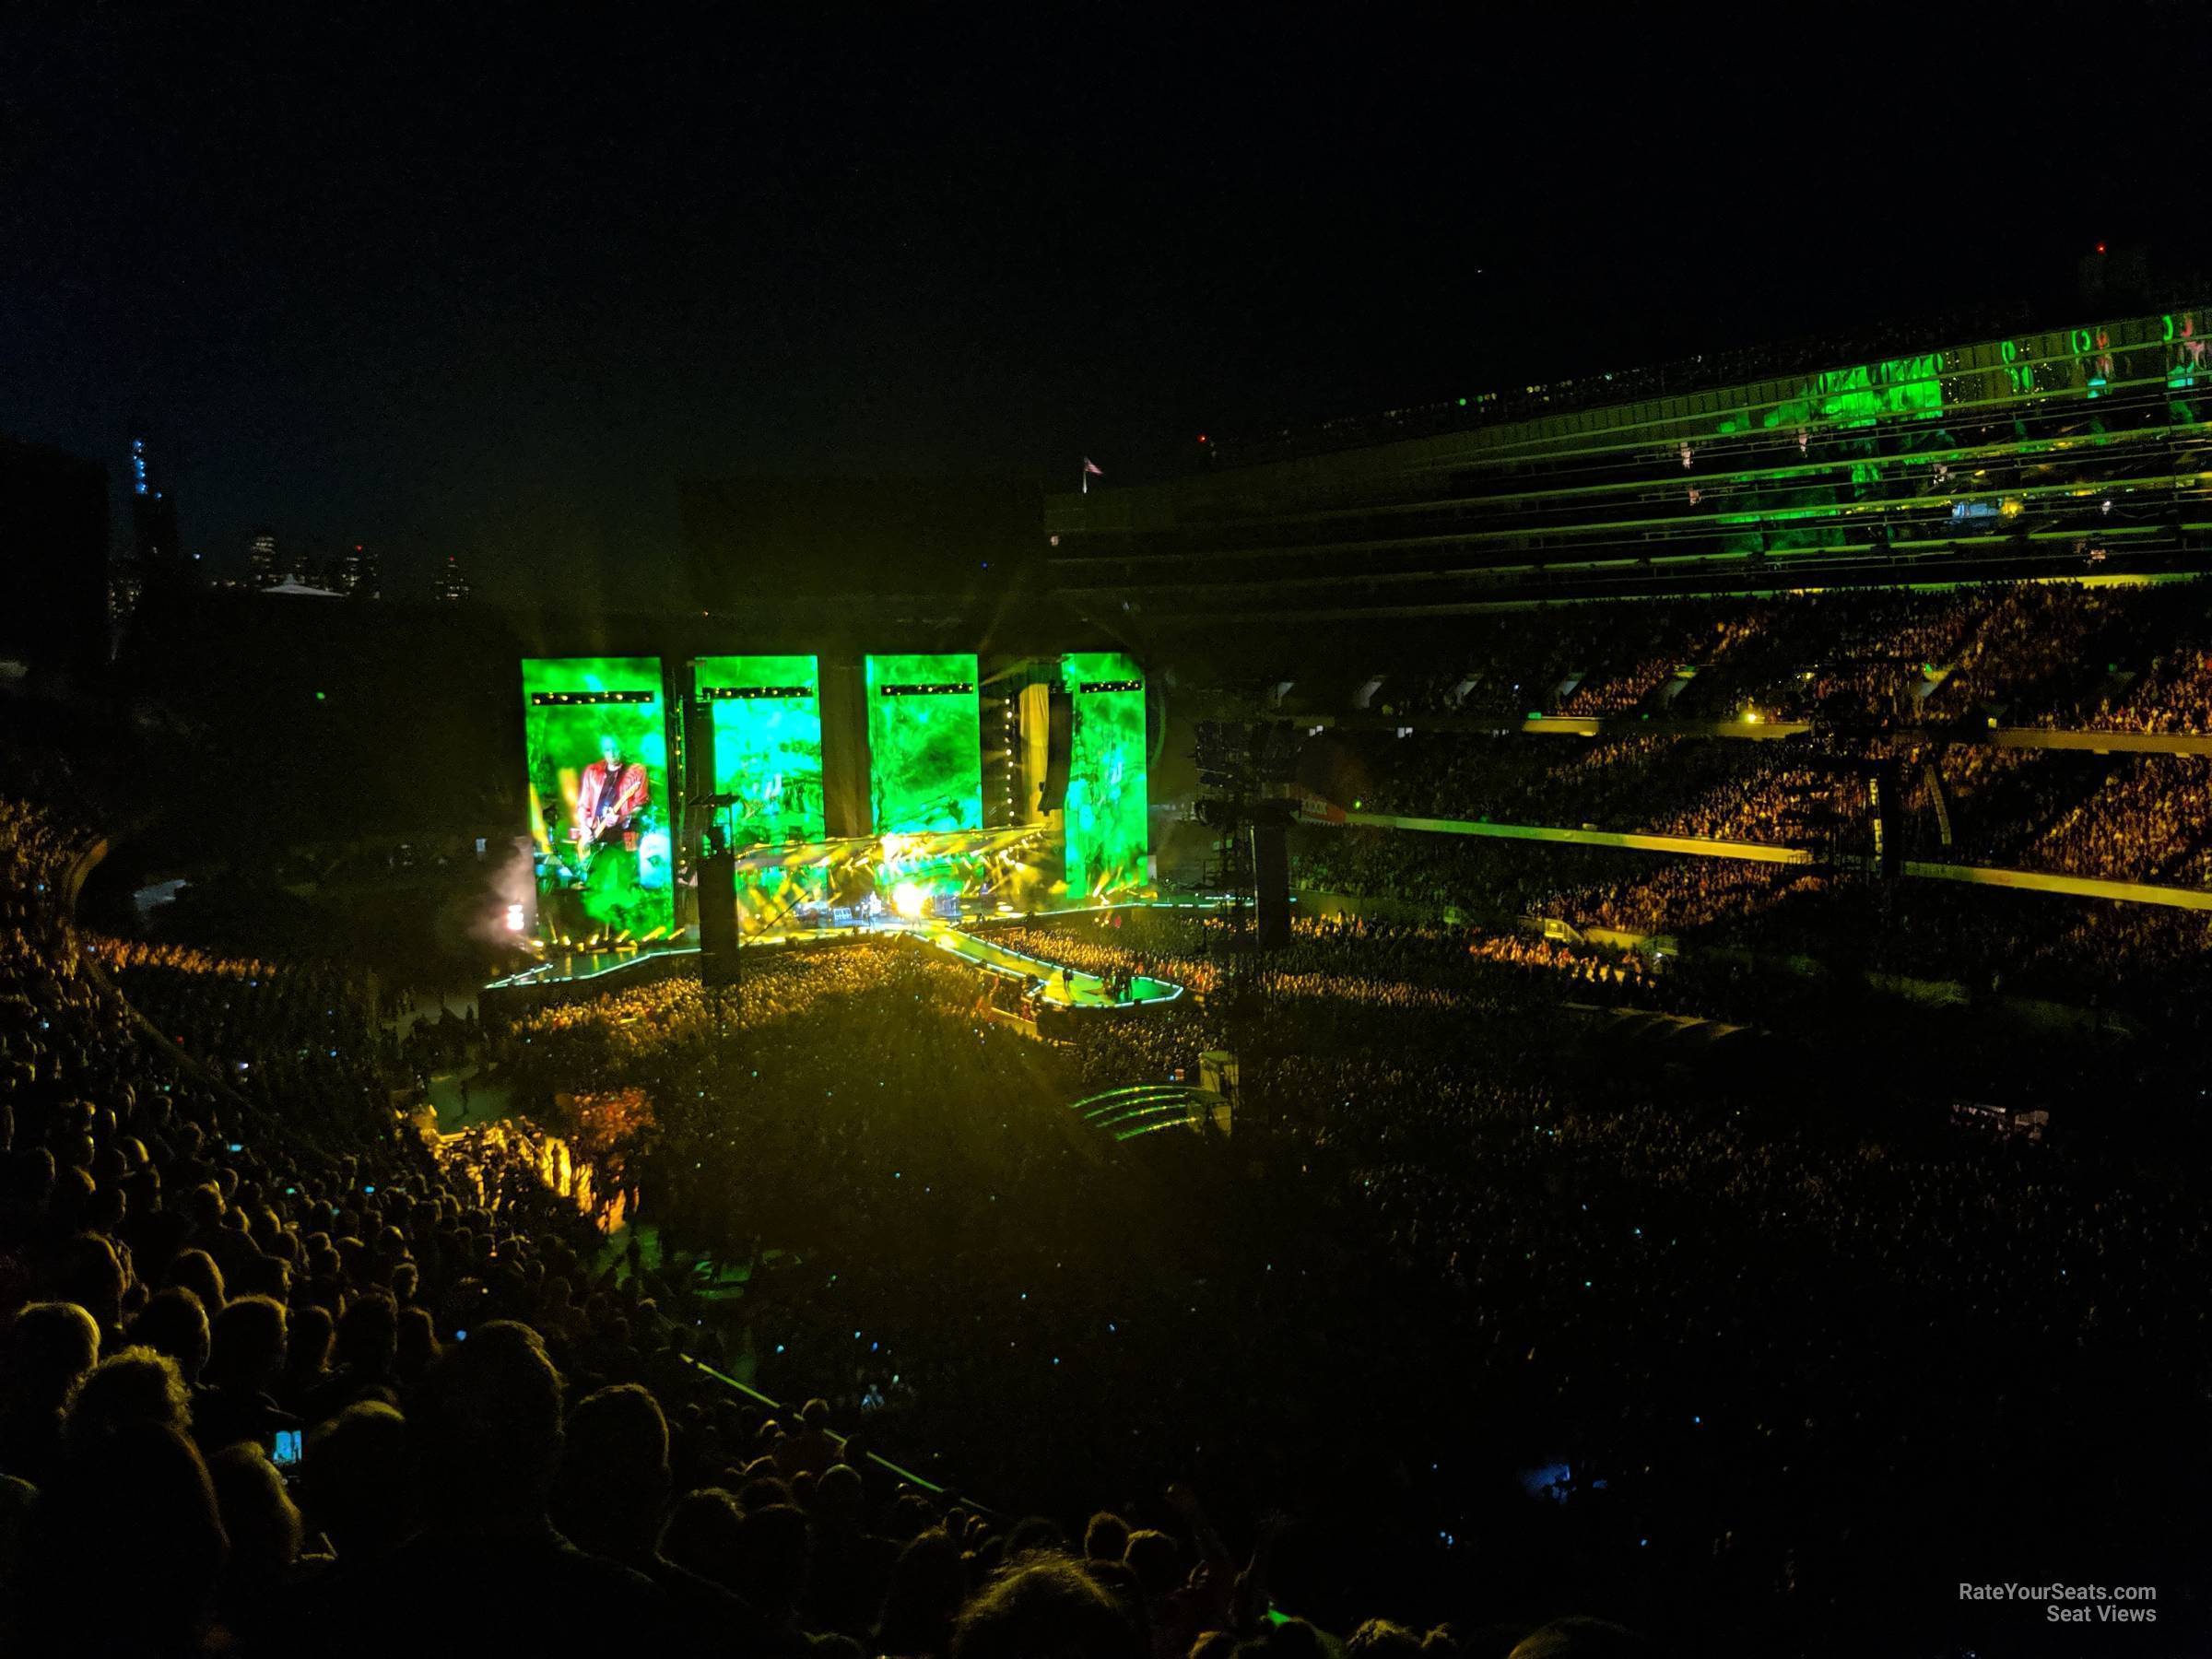 section 330, row 15 seat view  for concert - soldier field